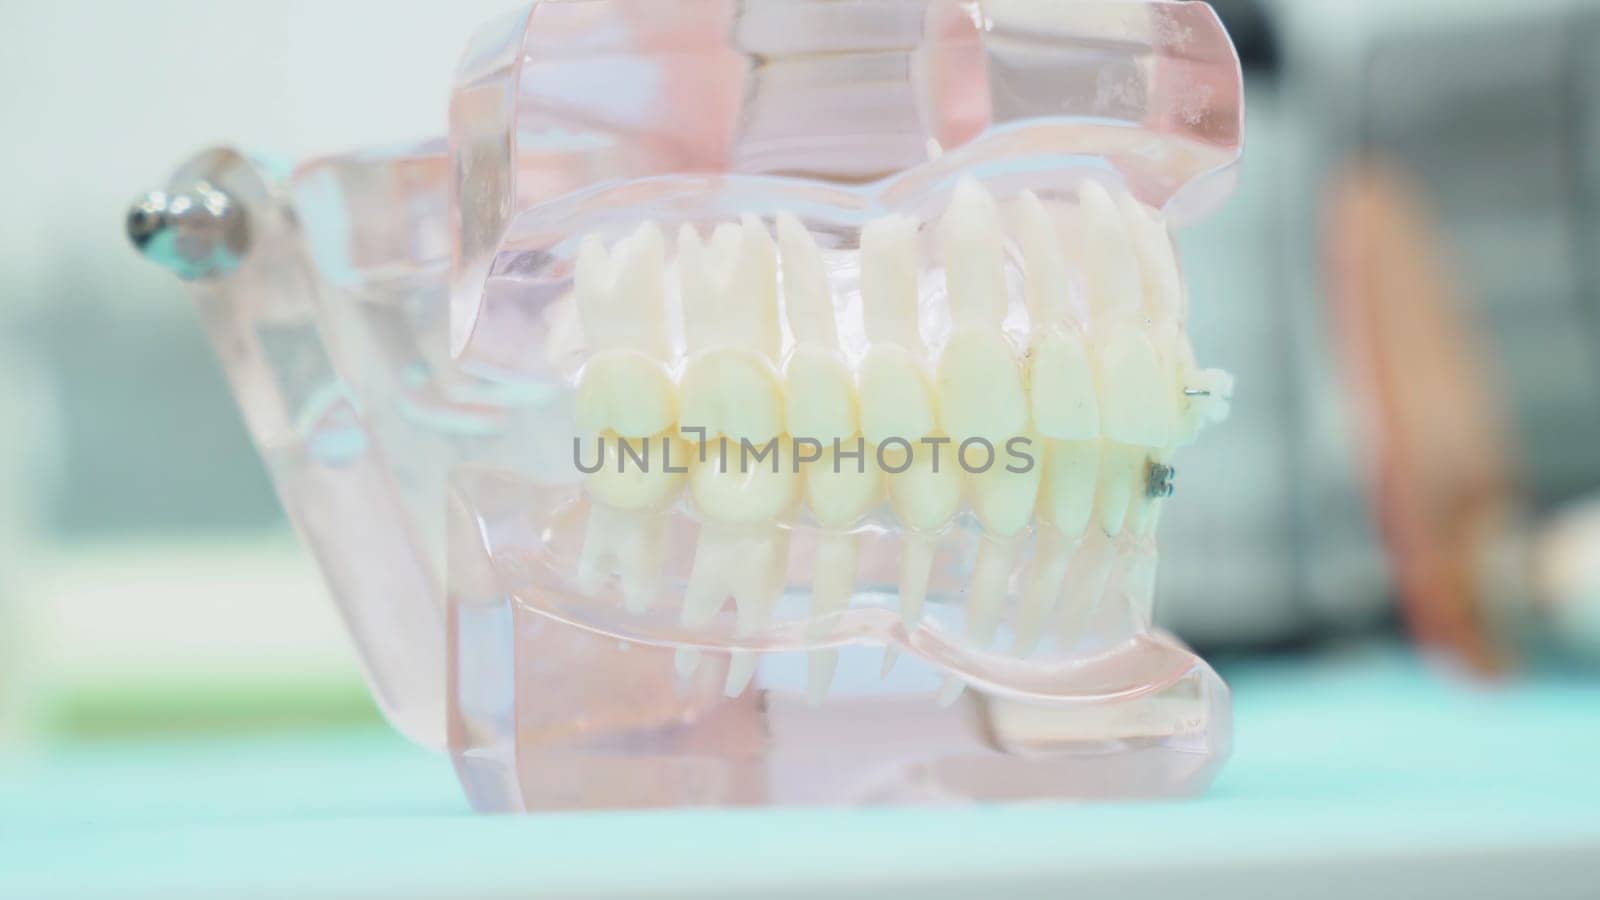 Close-up of denture jaw. Media. Denture of jaws with teeth with transparent gums stands on table in dental office. Modern design of jaw prosthesis.